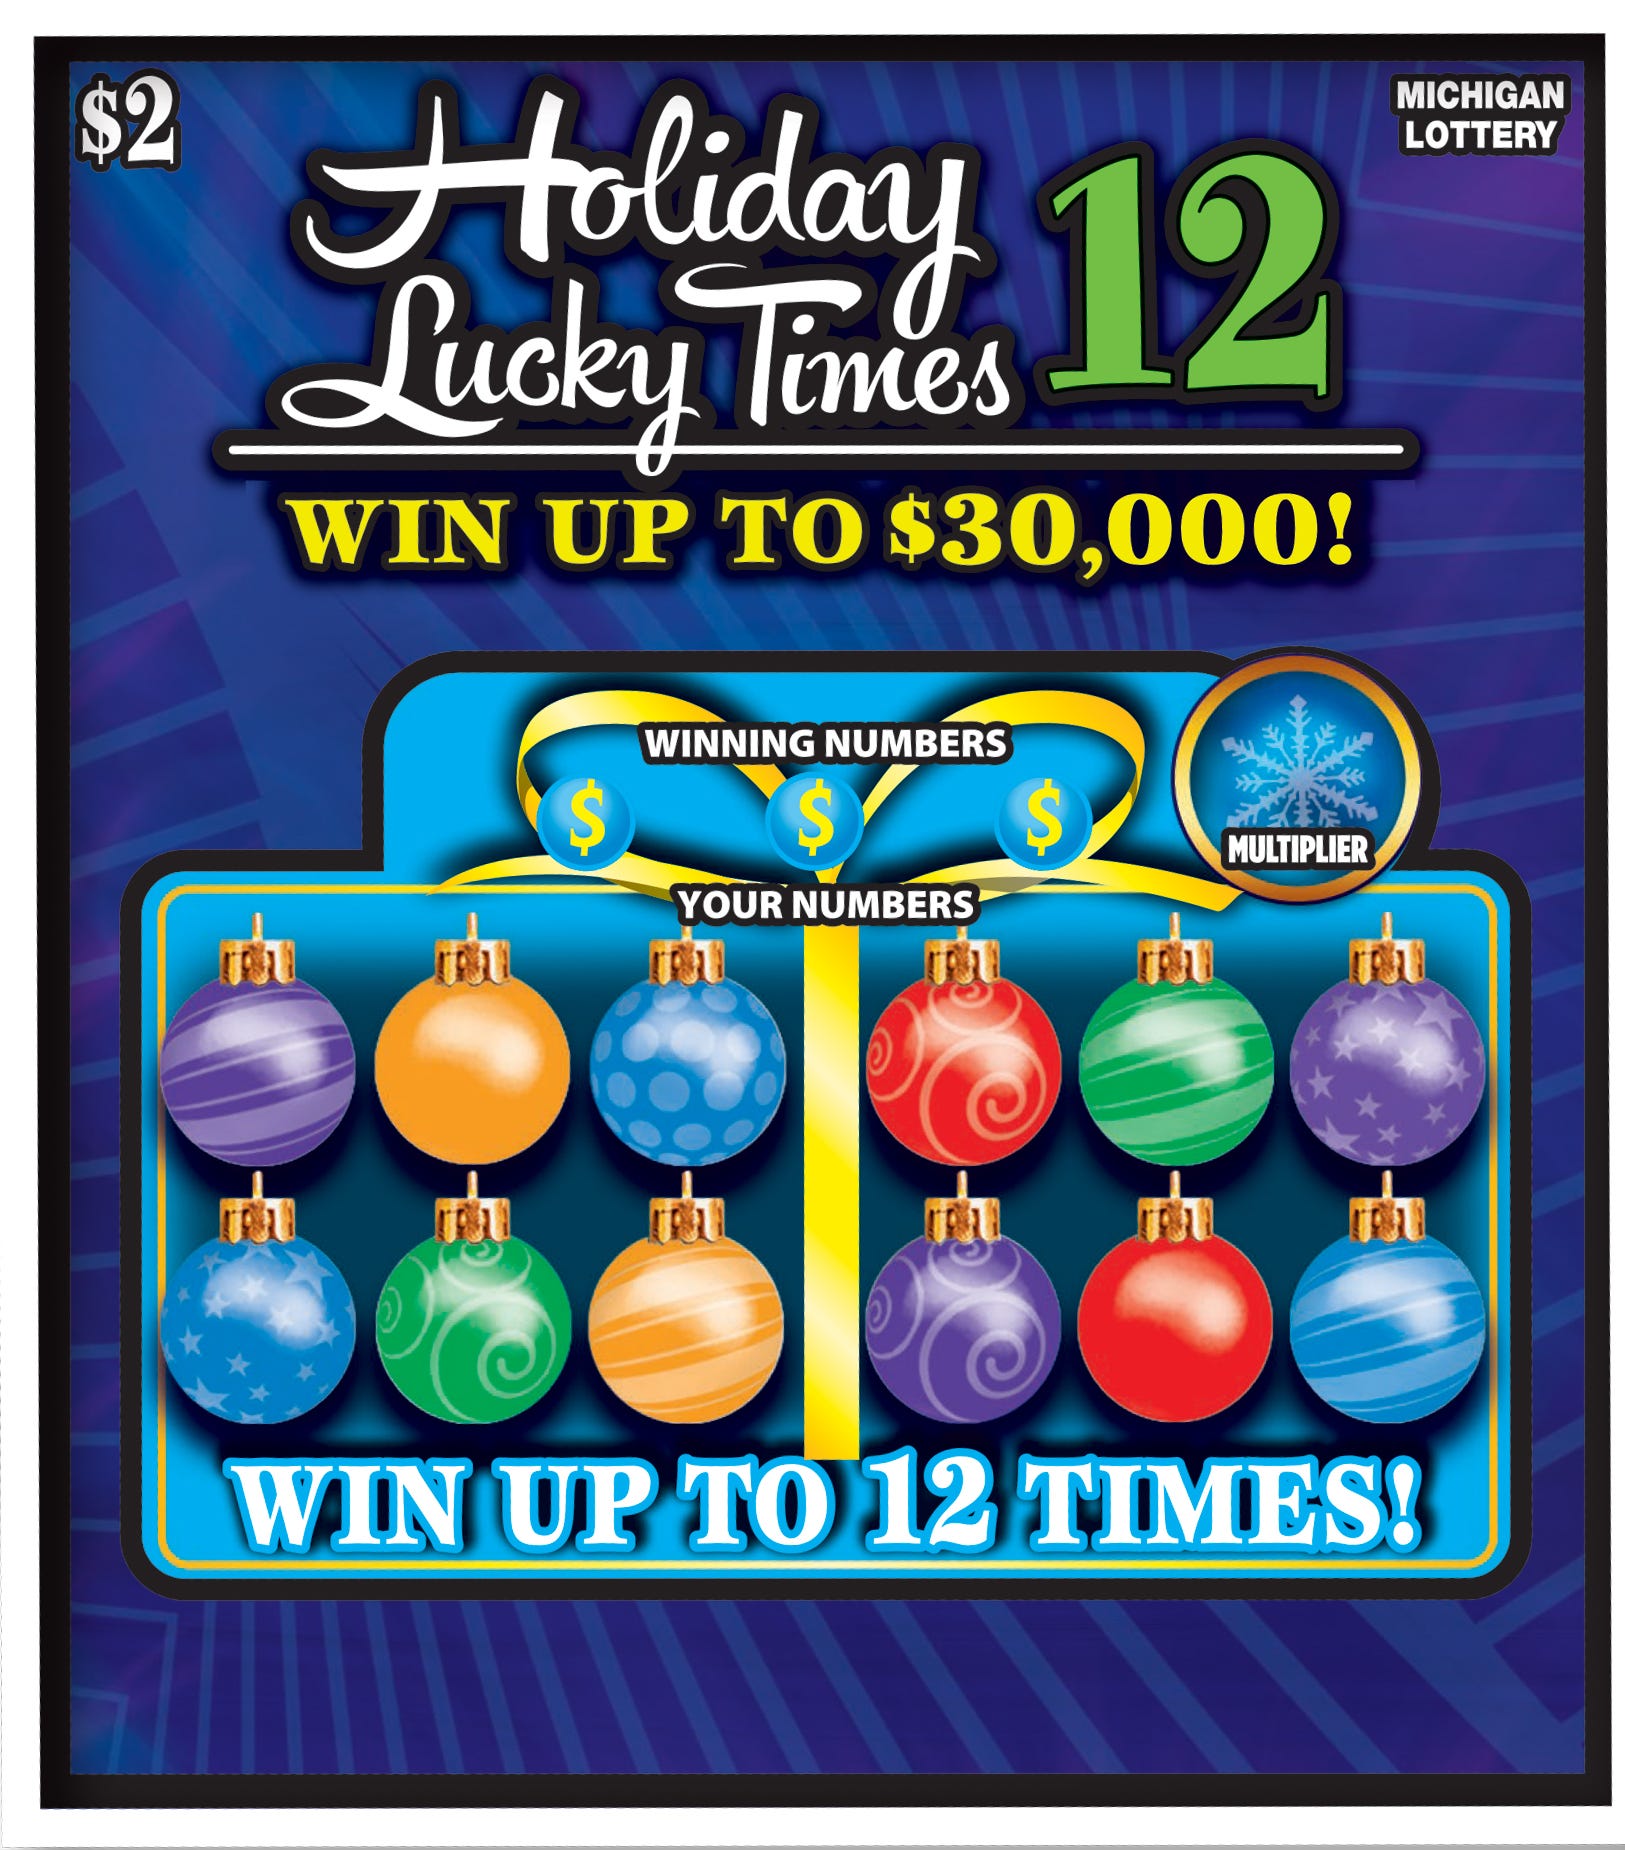 Michigan Lottery instant tickets New holiday scratchoffs